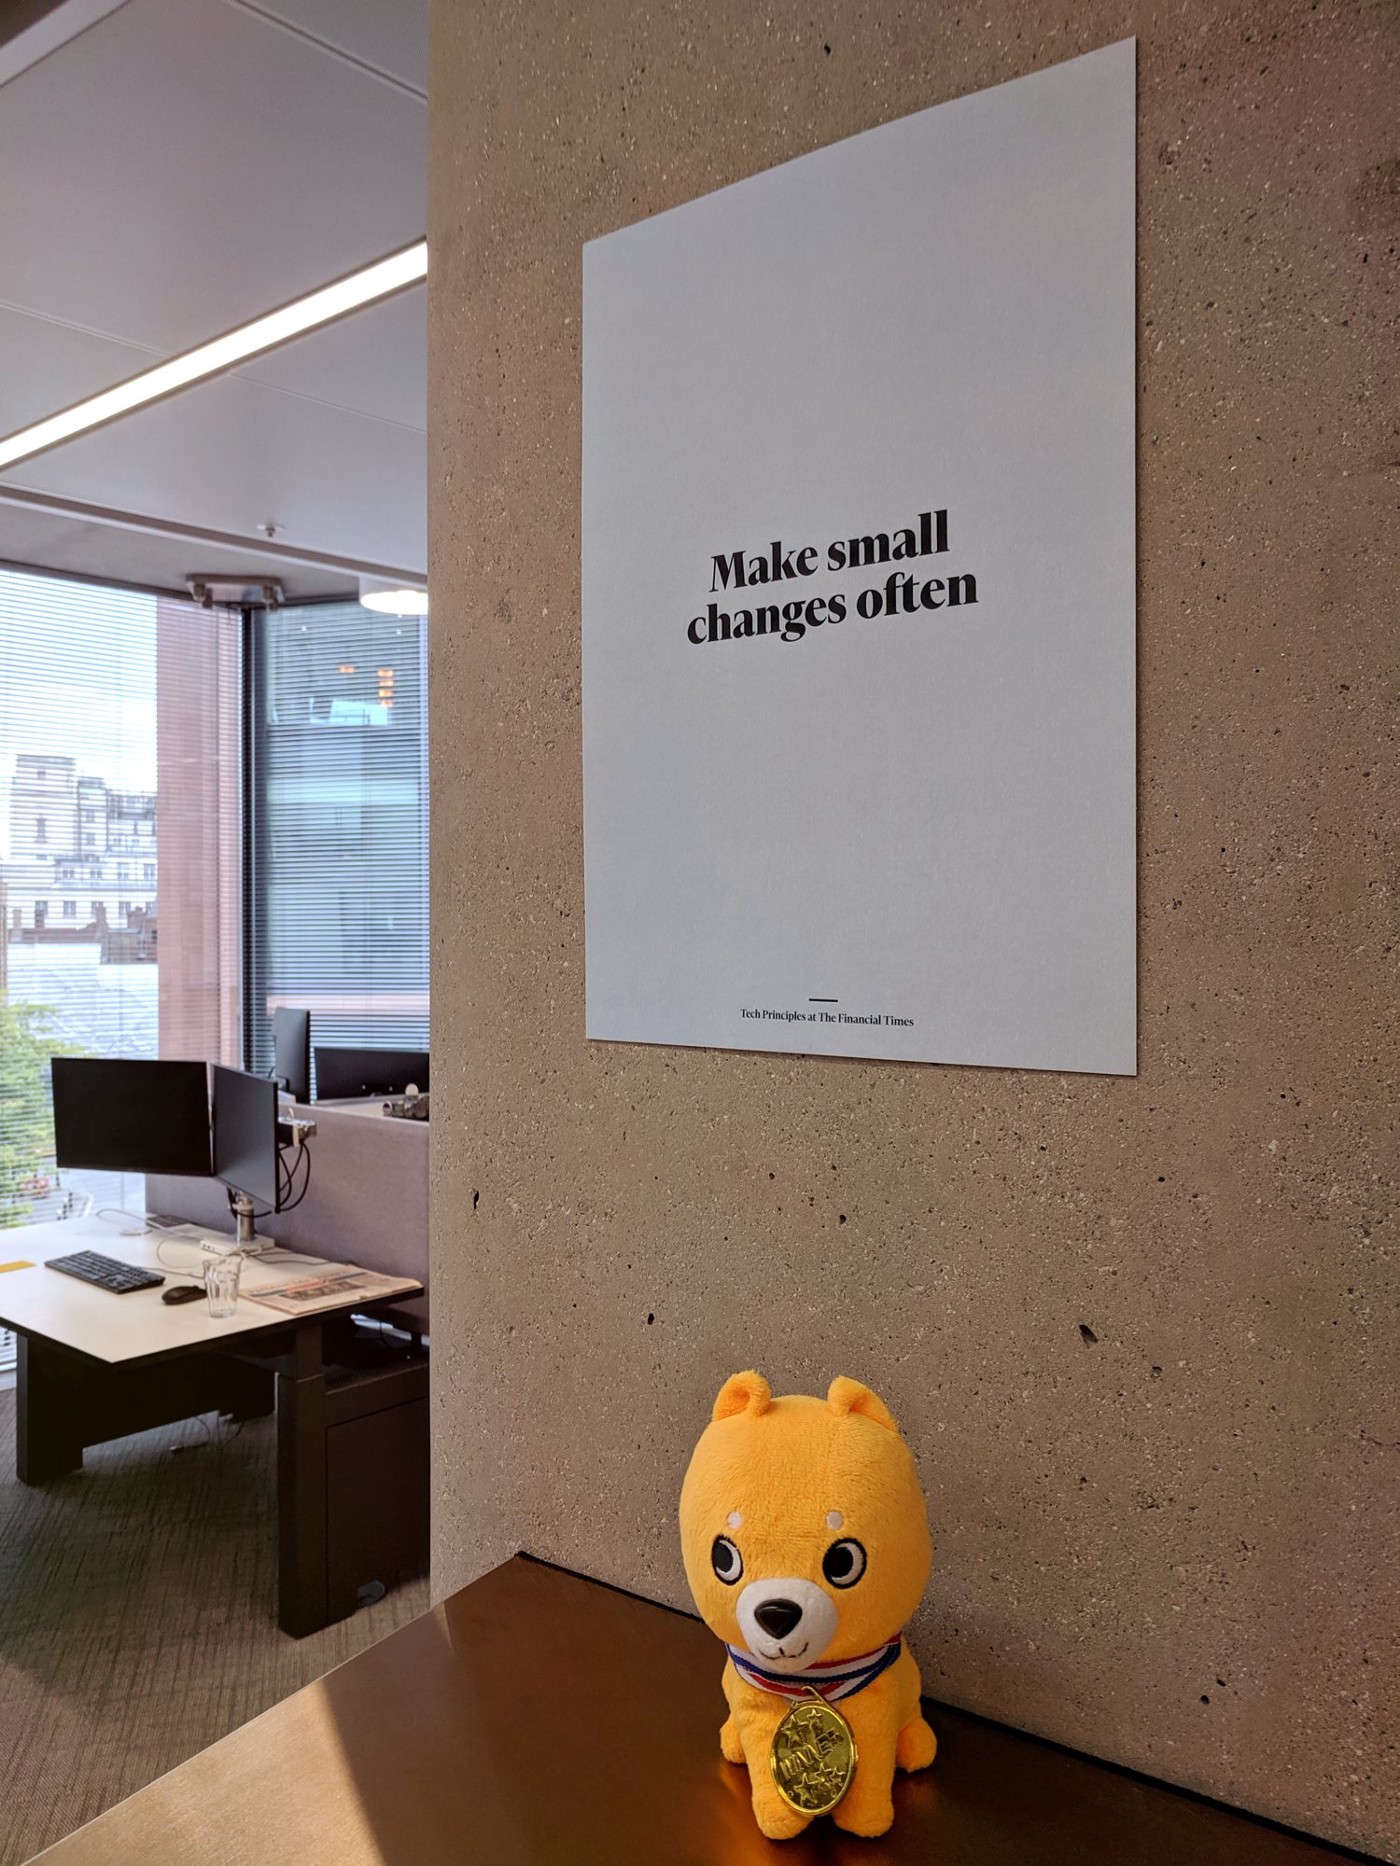 A poster on the wall with the text "Make small changes often"